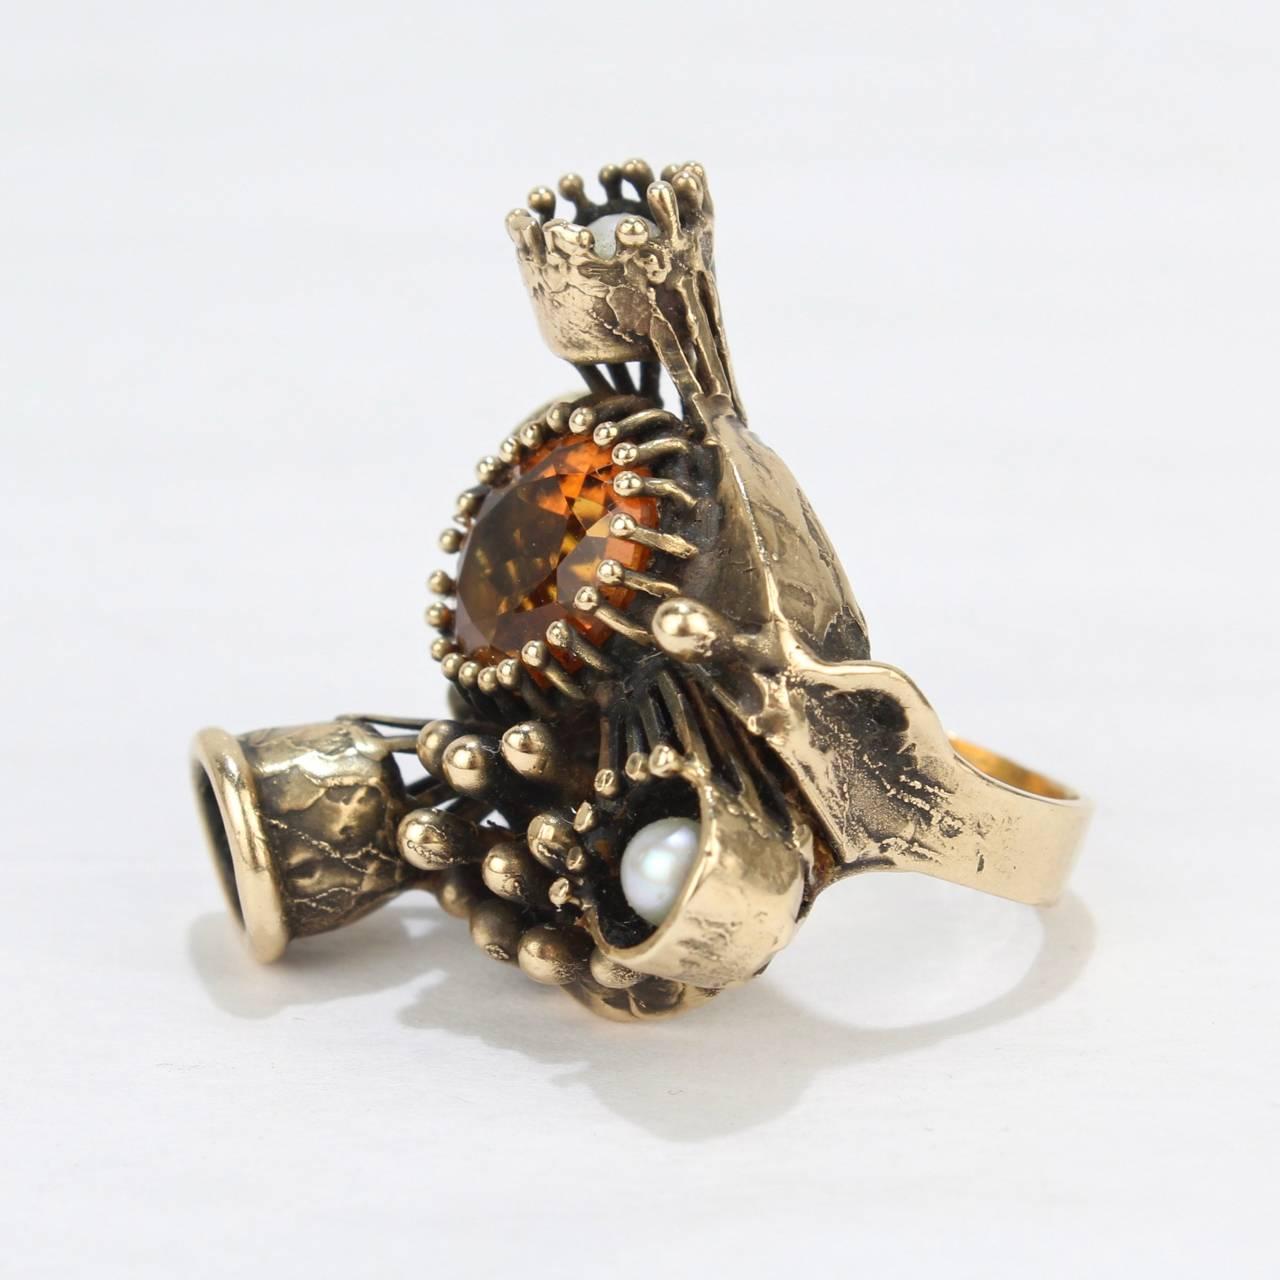 A futuristic Steam Punk 14-karat ring with pearls and a citrine by Lee Peck.

Simply a compelling ring with subtle depth and outlandish style!

Lee Barnes Peck was a distinguished Professor of Metal & Jewelry at Northern Illinois for decades. His